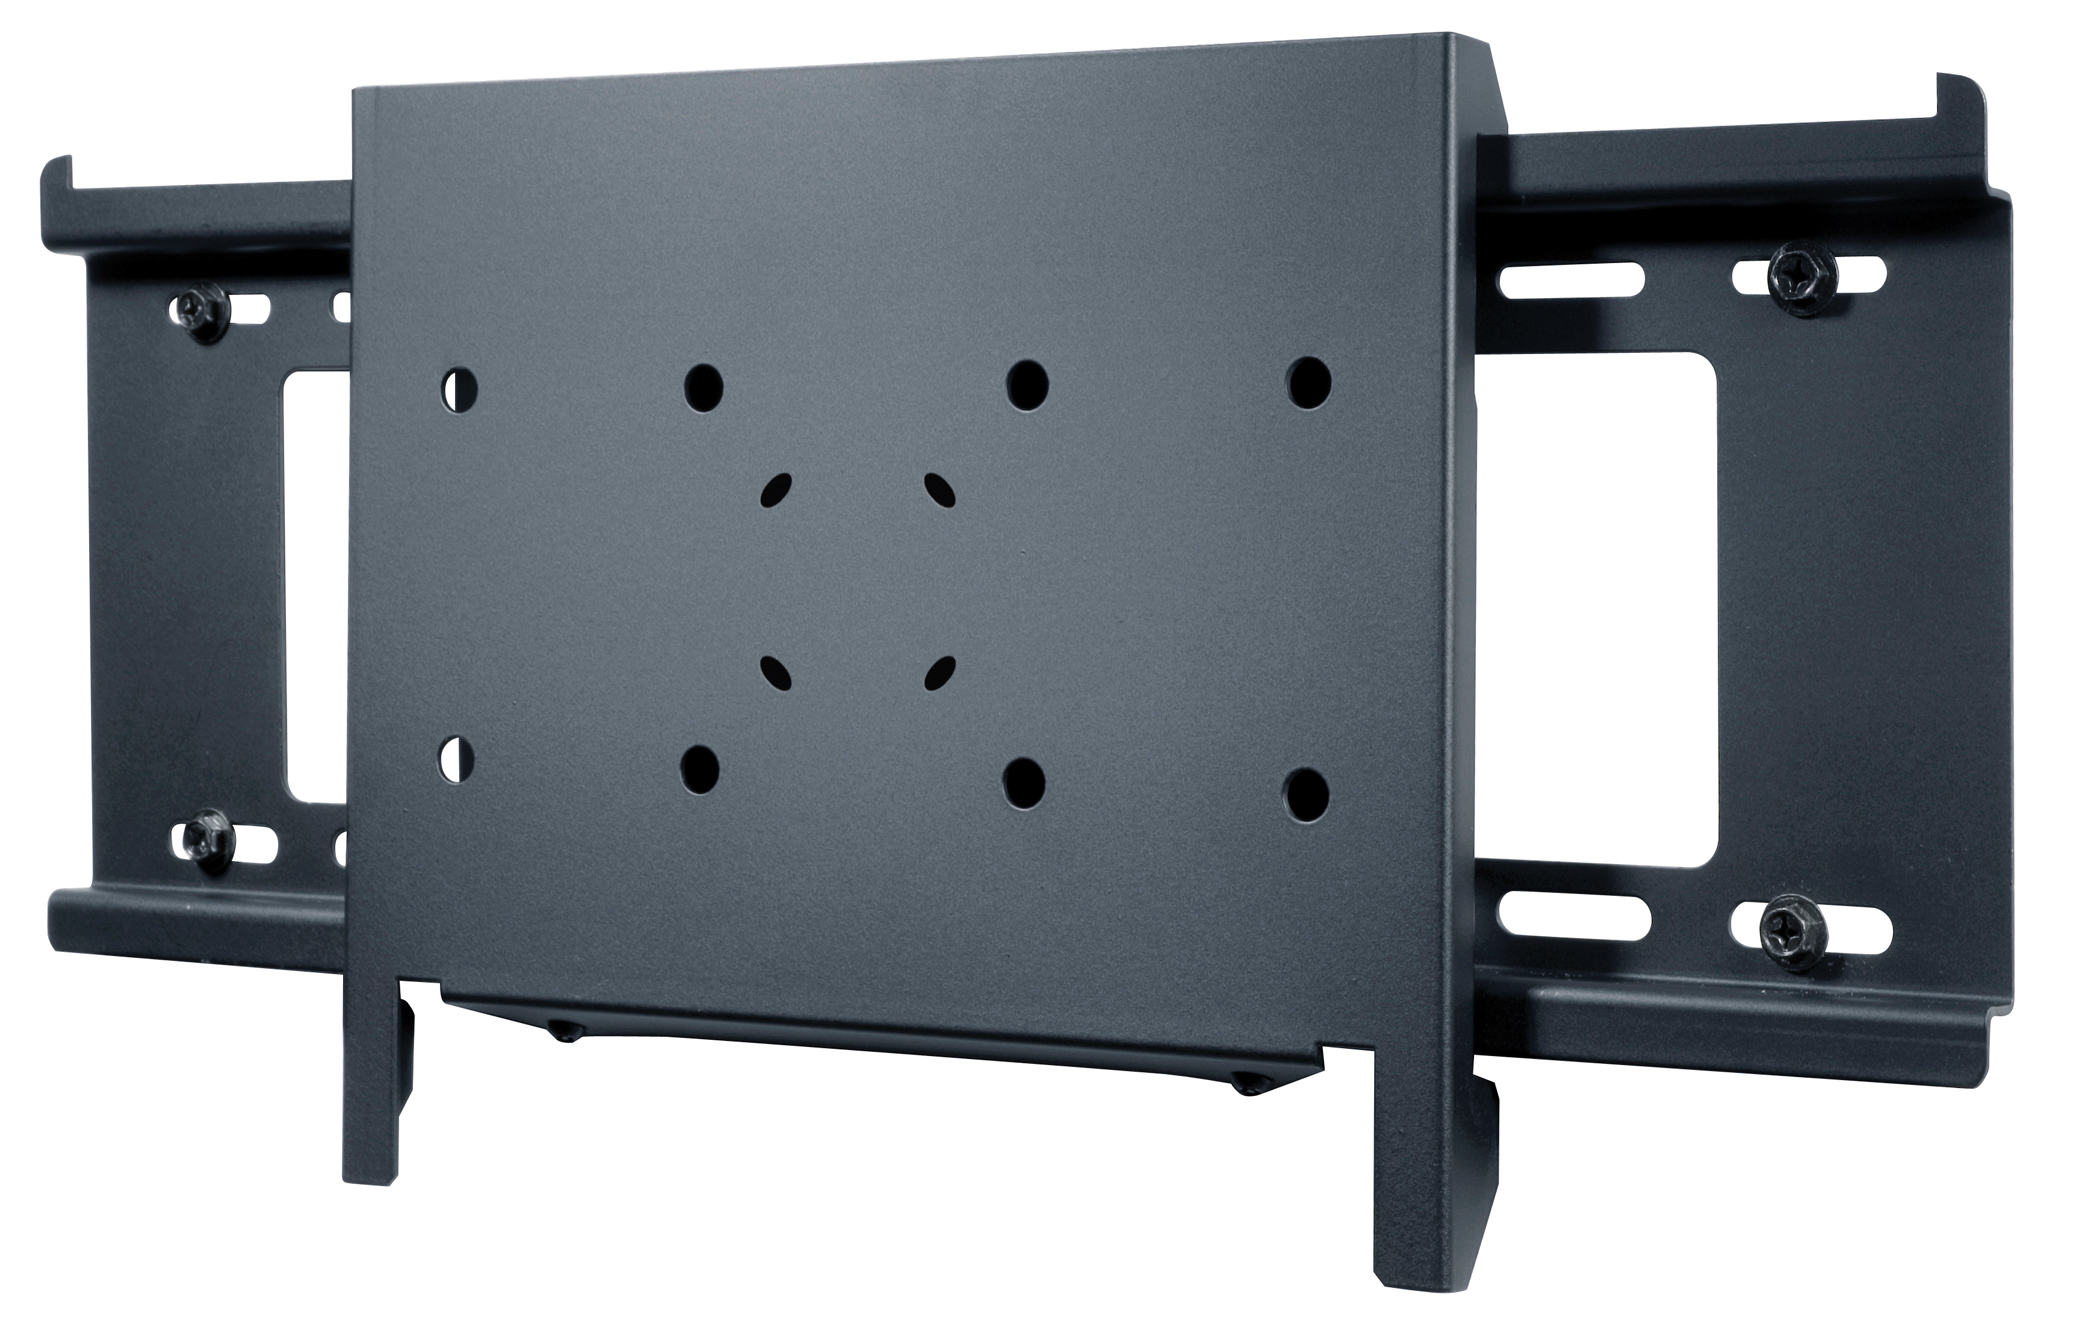 SF16D SmartMount Display-Specific Flat Wall Mount for up to 71" Displays